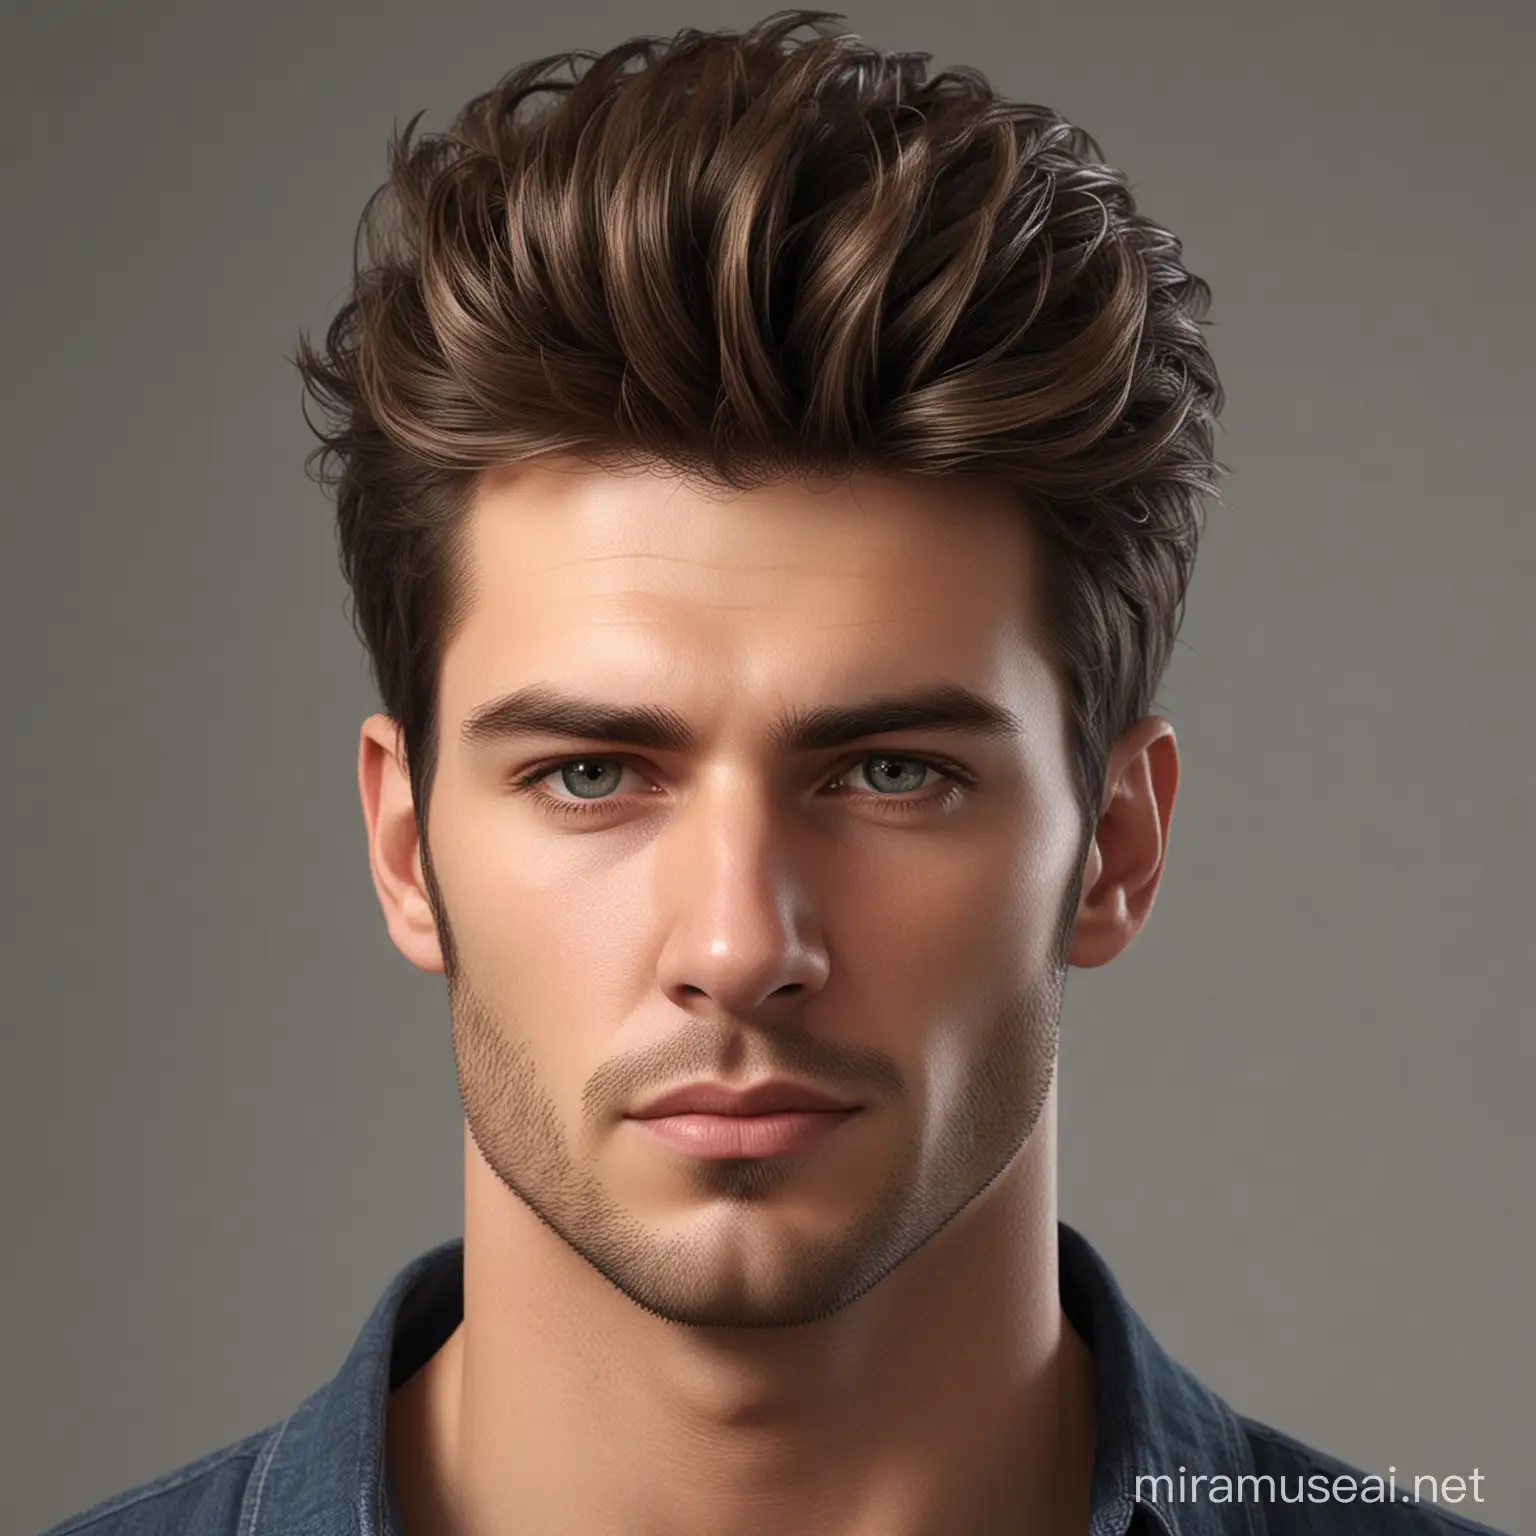 "Generate a photorealistic image of a man with a stunning hairstyle. The hair should have a detailed texture that looks natural and unaltered.